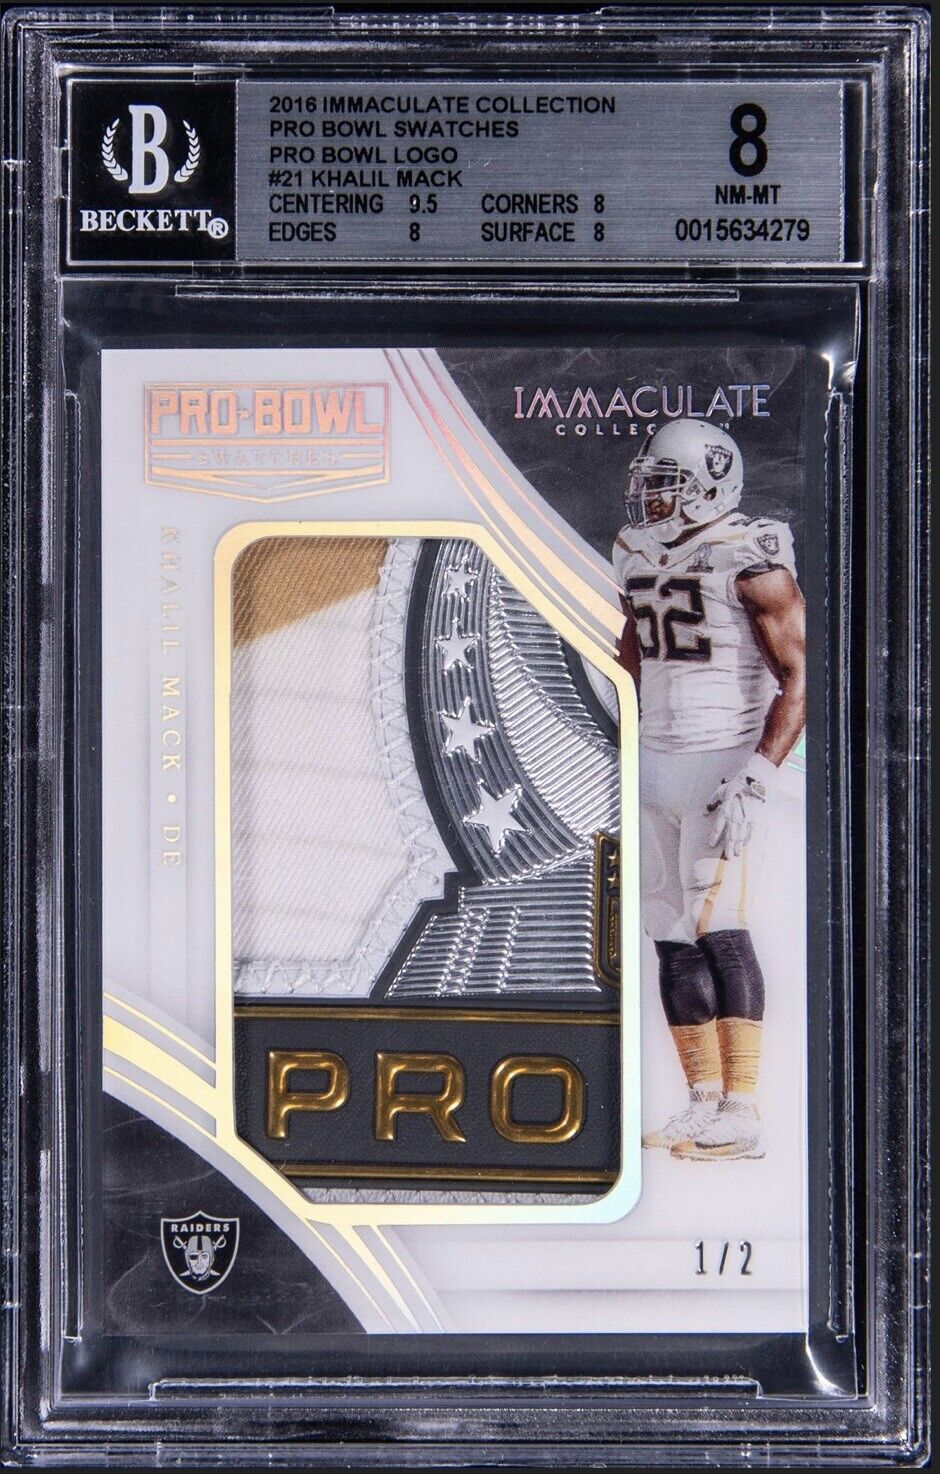 2016 Immaculate Collection Pro Bowl Swatches Khalil Mack /2 BGS 8 Raiders #21